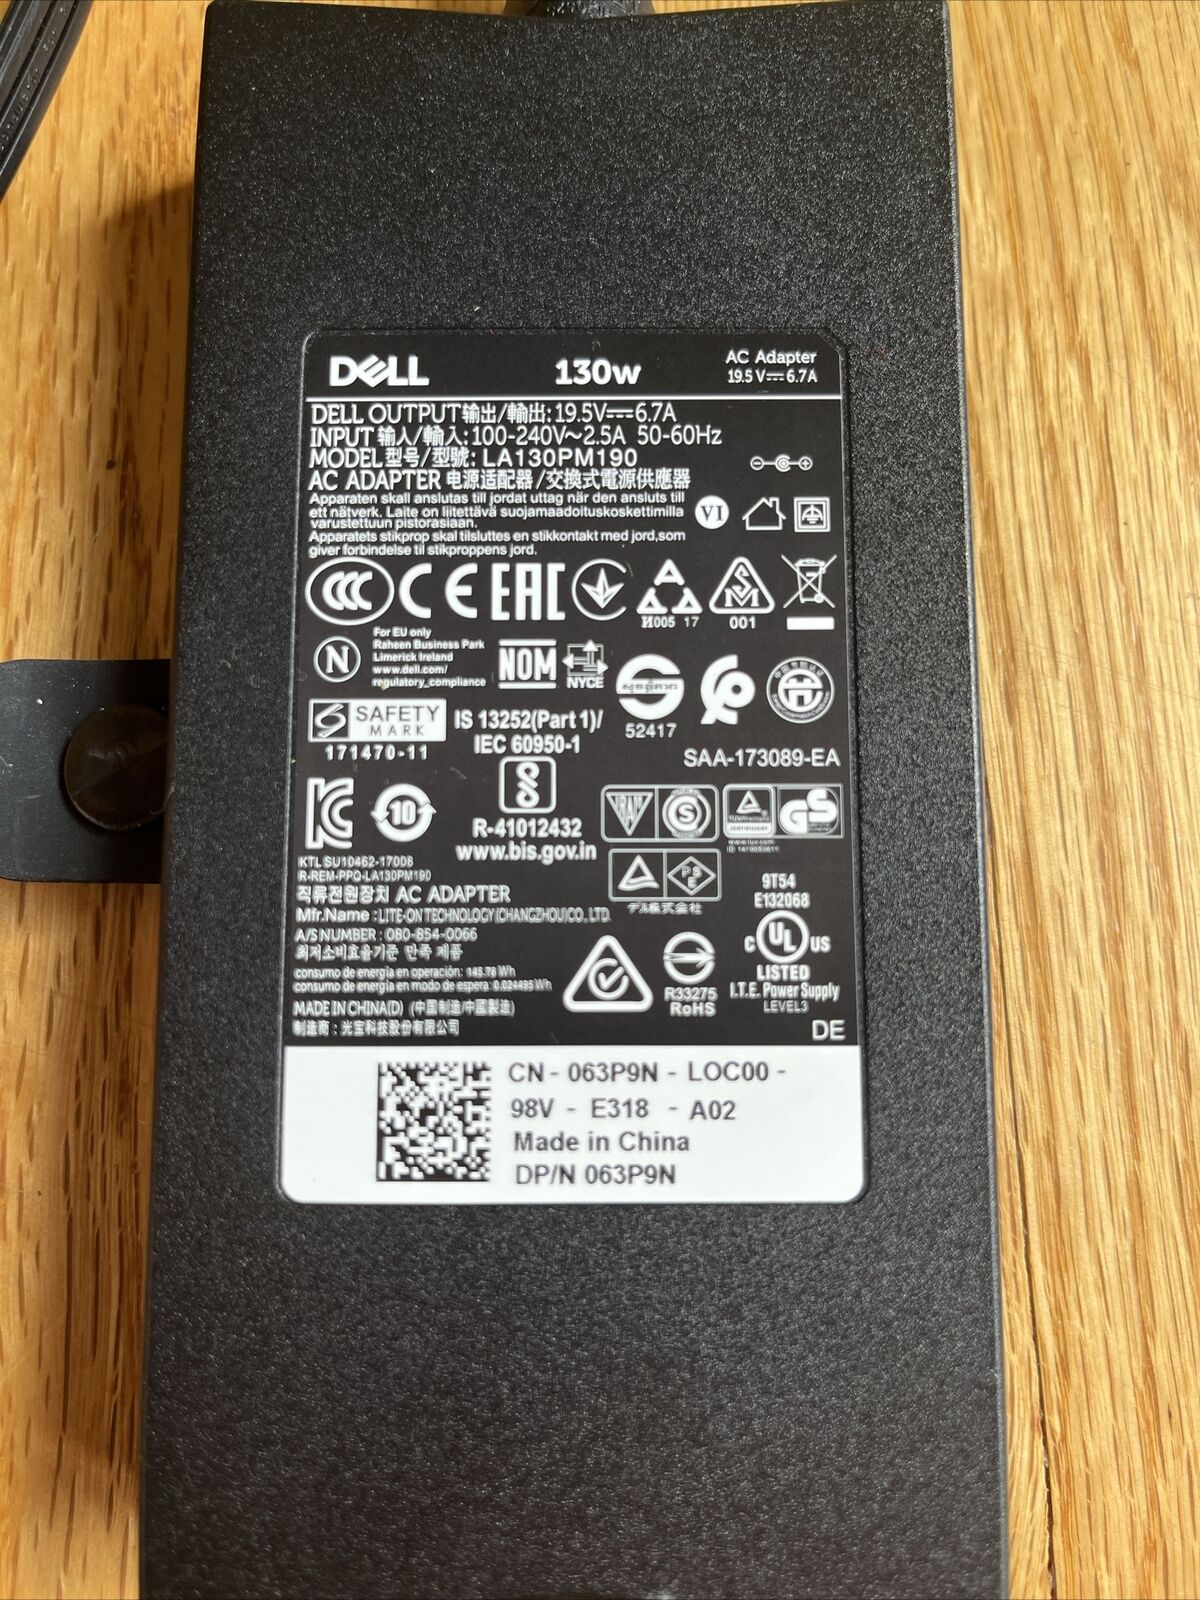 Genuine Dell 130W 19.5V 4.5mm AC Adapter Charger -Model: LA130PM190 Tested Works